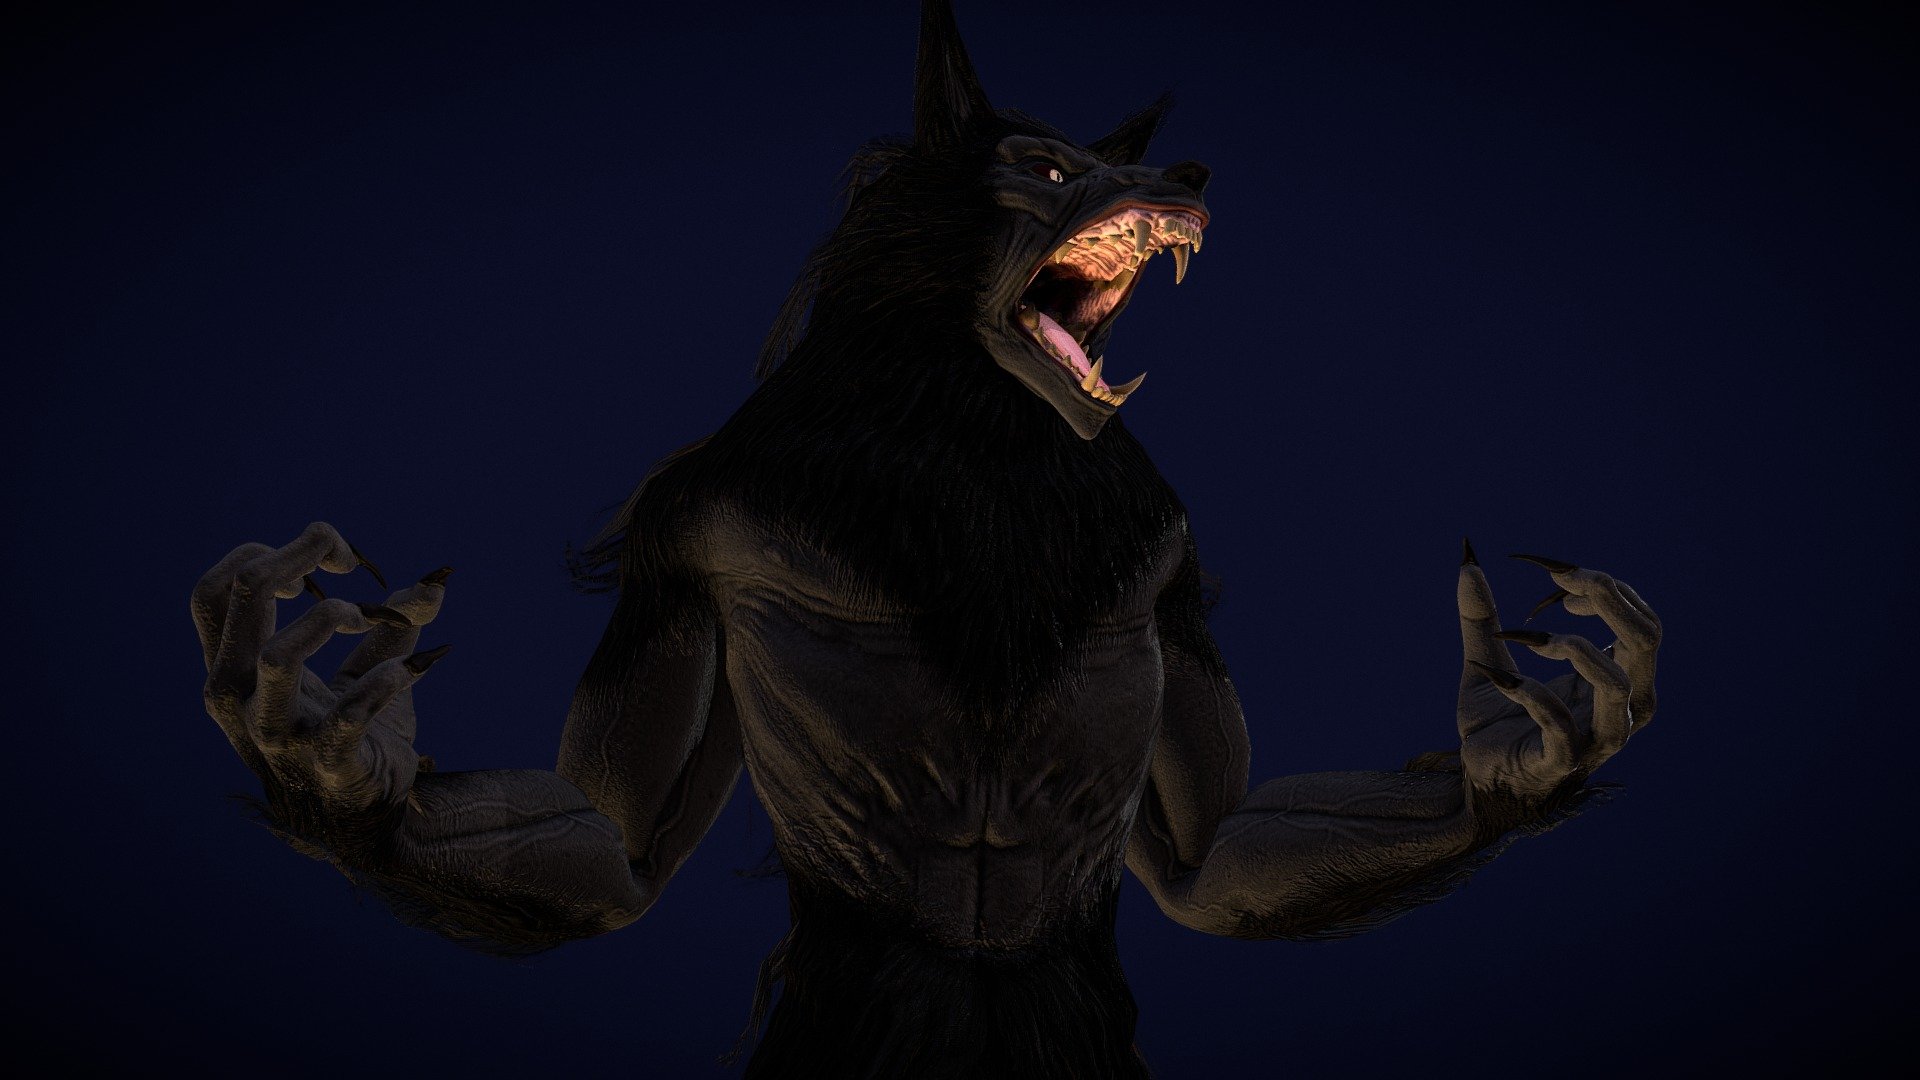 The player character model for the Werewolf  from the PC game Horror Legends.

https://store.steampowered.com/app/965640/Horror_Legends/?beta=0 - Werewolf from Horror Legends - 3D model by drakekaz 3d model